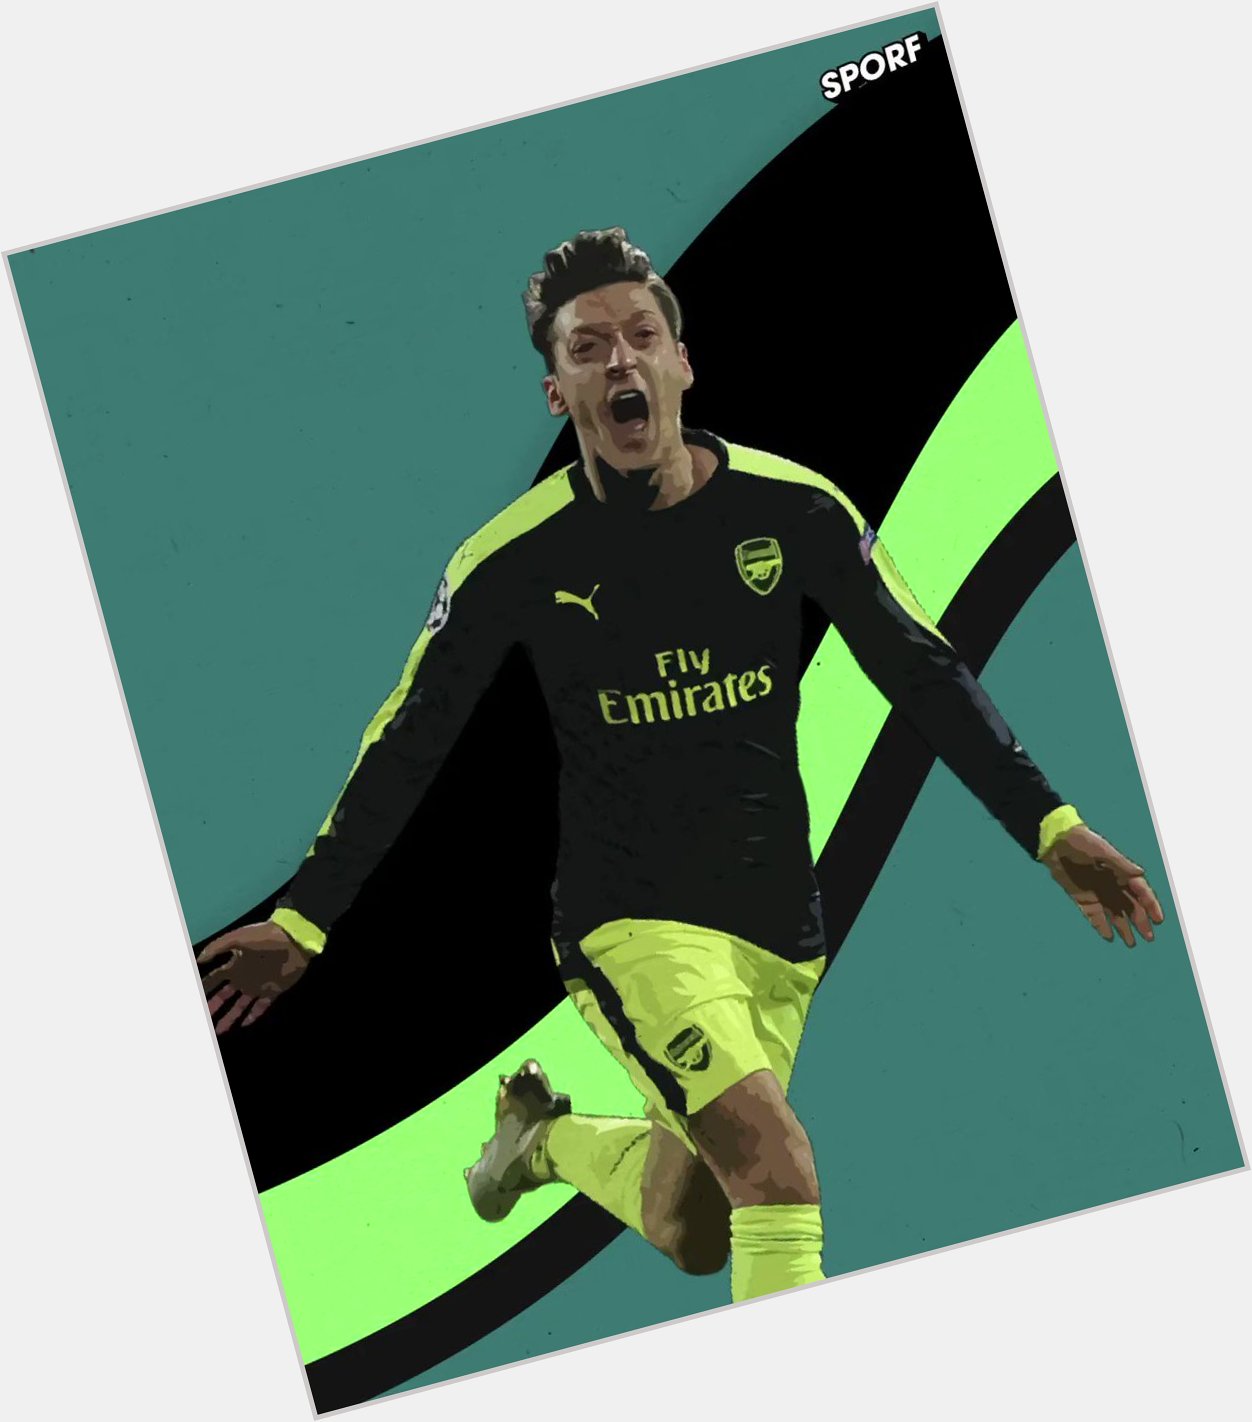 Legendary goal from a player I wish played more often. Happy birthday Mesut 